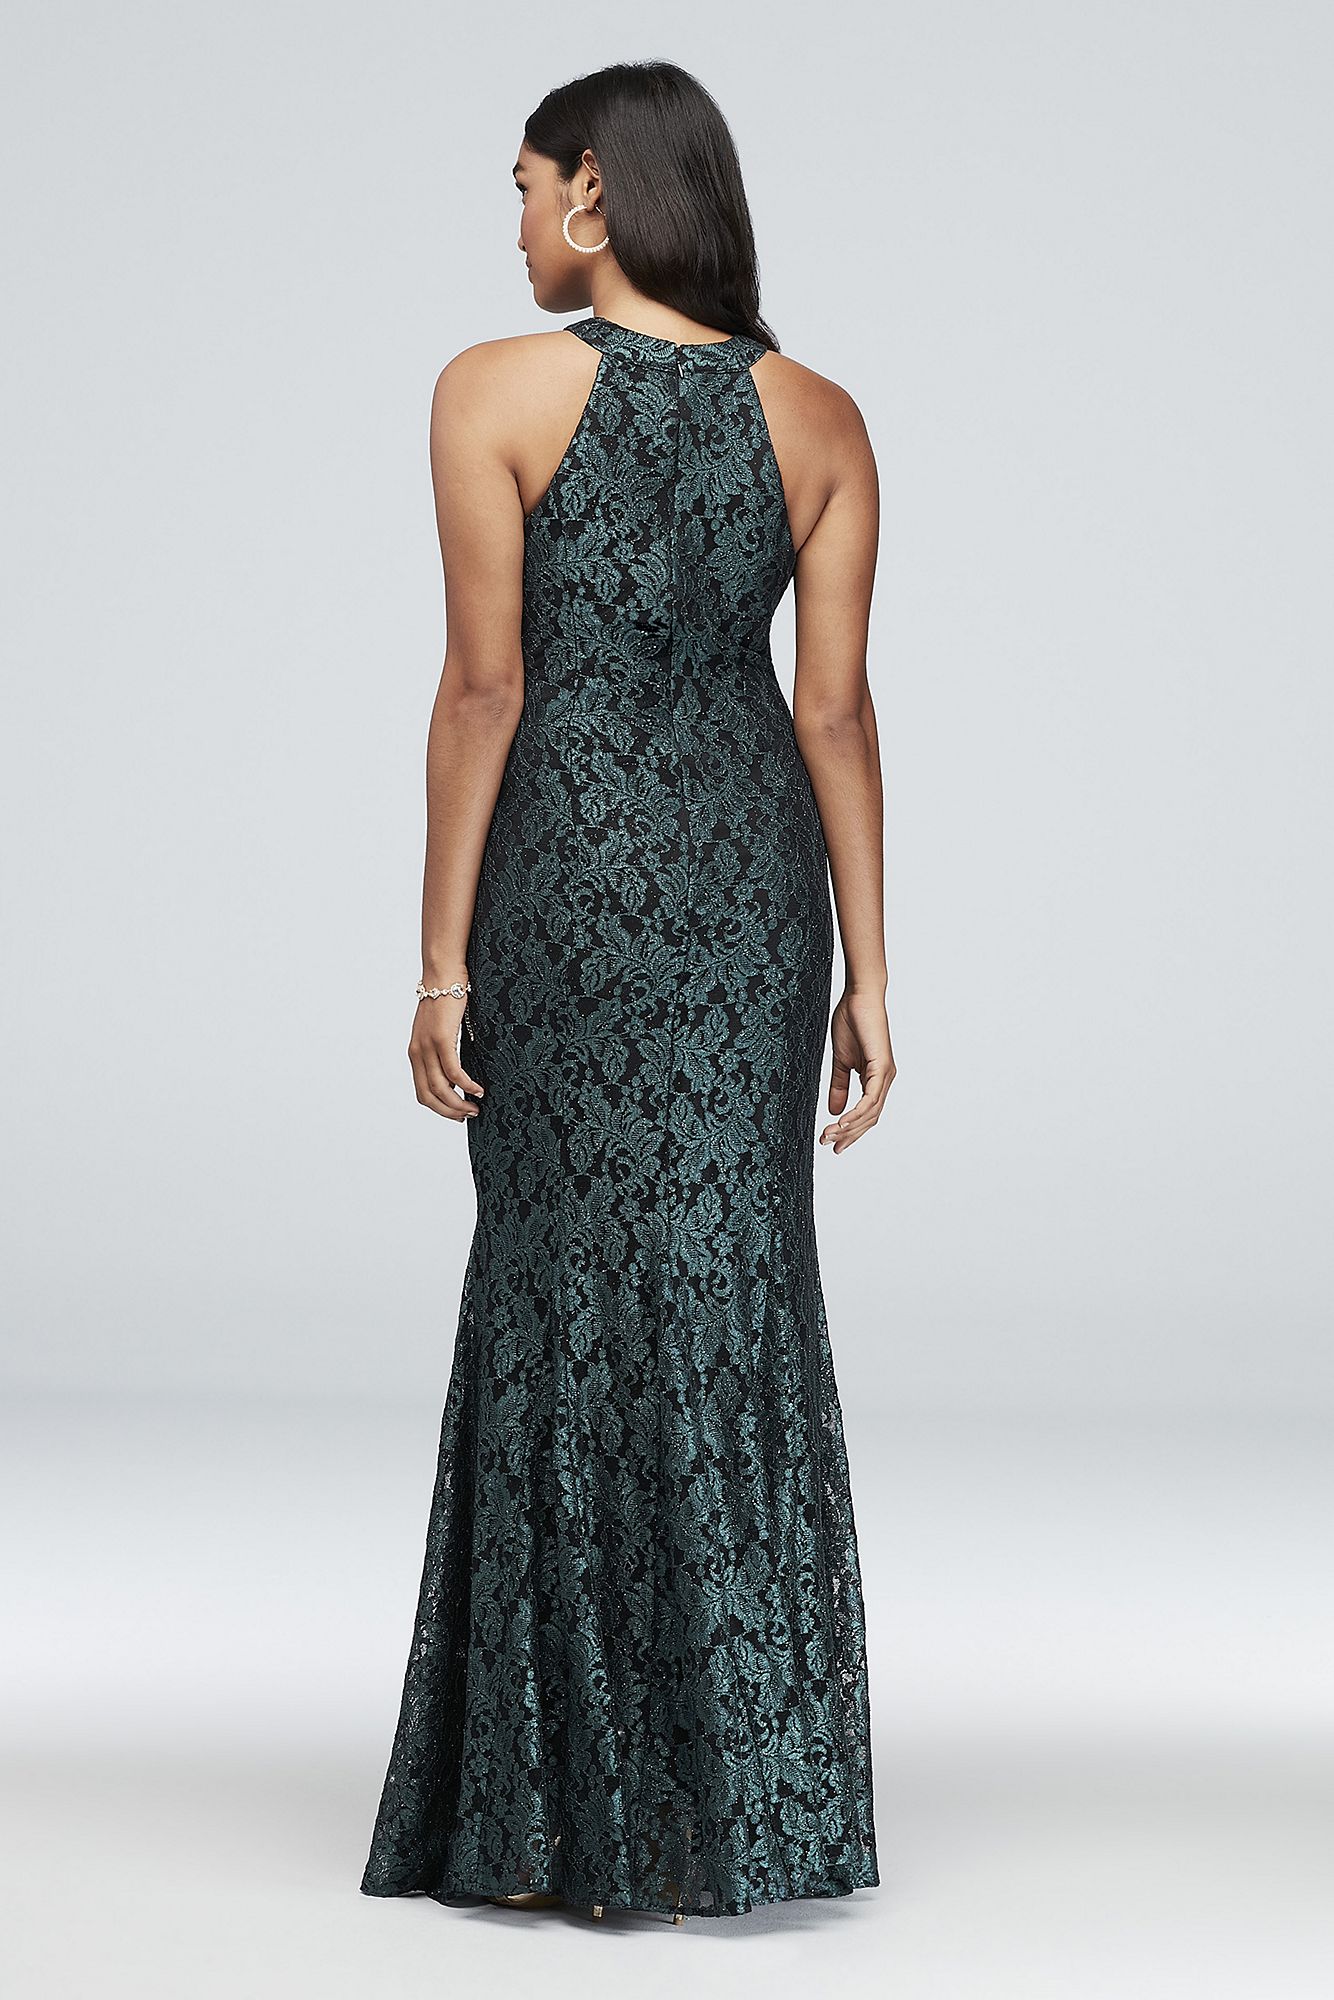 Long Fit and Flare 21689 Style High-Neck Halter Mermaid Lace Gown